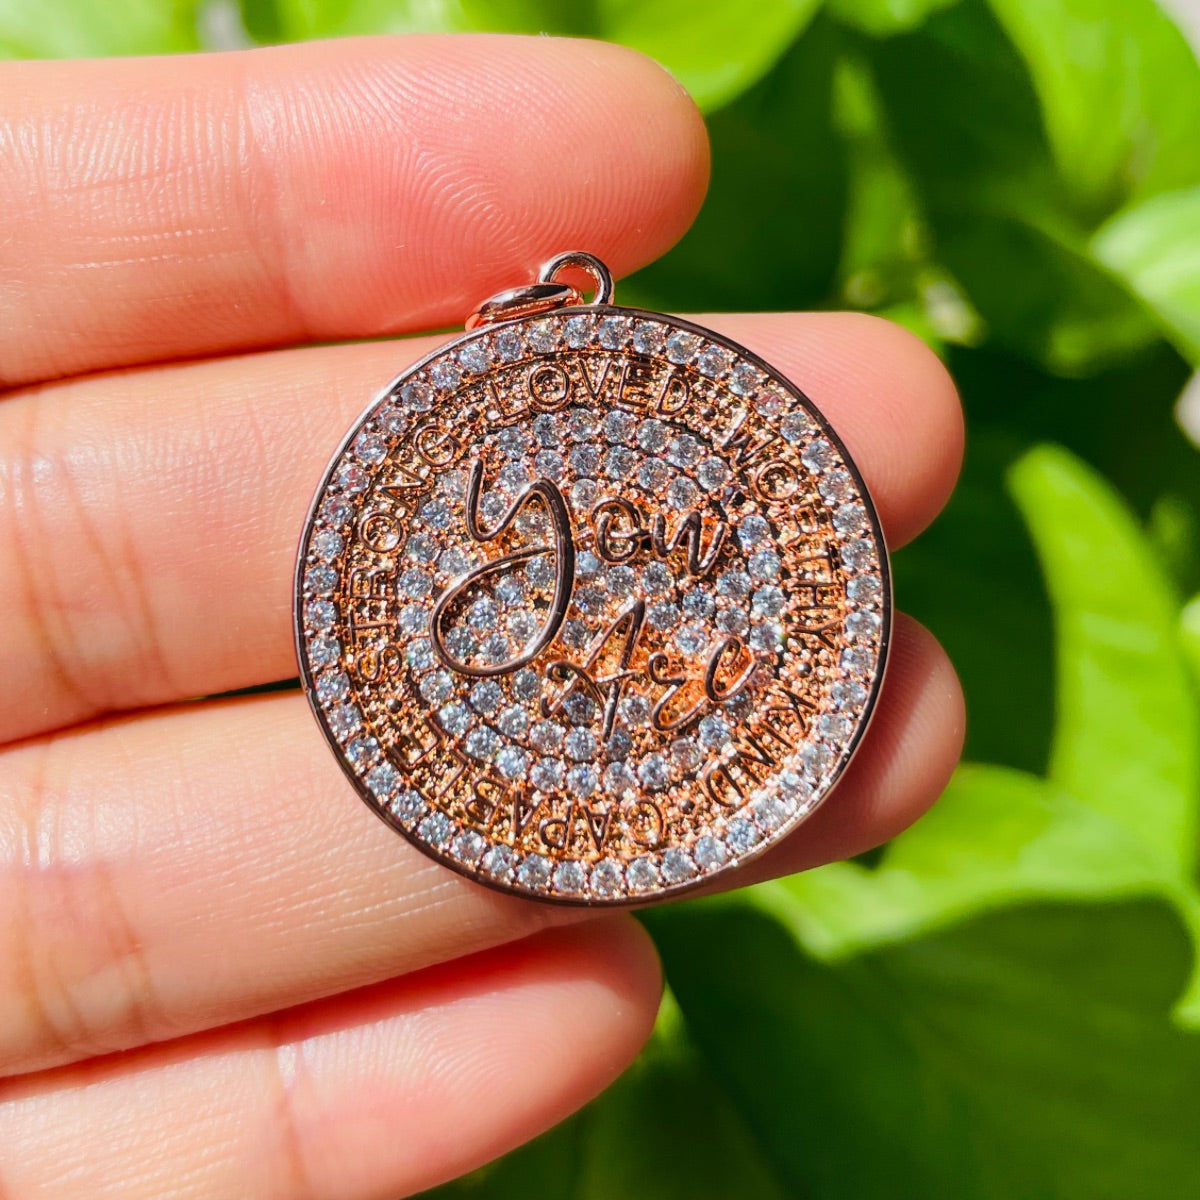 10pcs/lot 28mm CZ Pave Round Plate YOU ARE LOVED WORTHY KIND CAPABLE STRONG Quote Charms Rose Gold CZ Paved Charms Discs On Sale Charms Beads Beyond